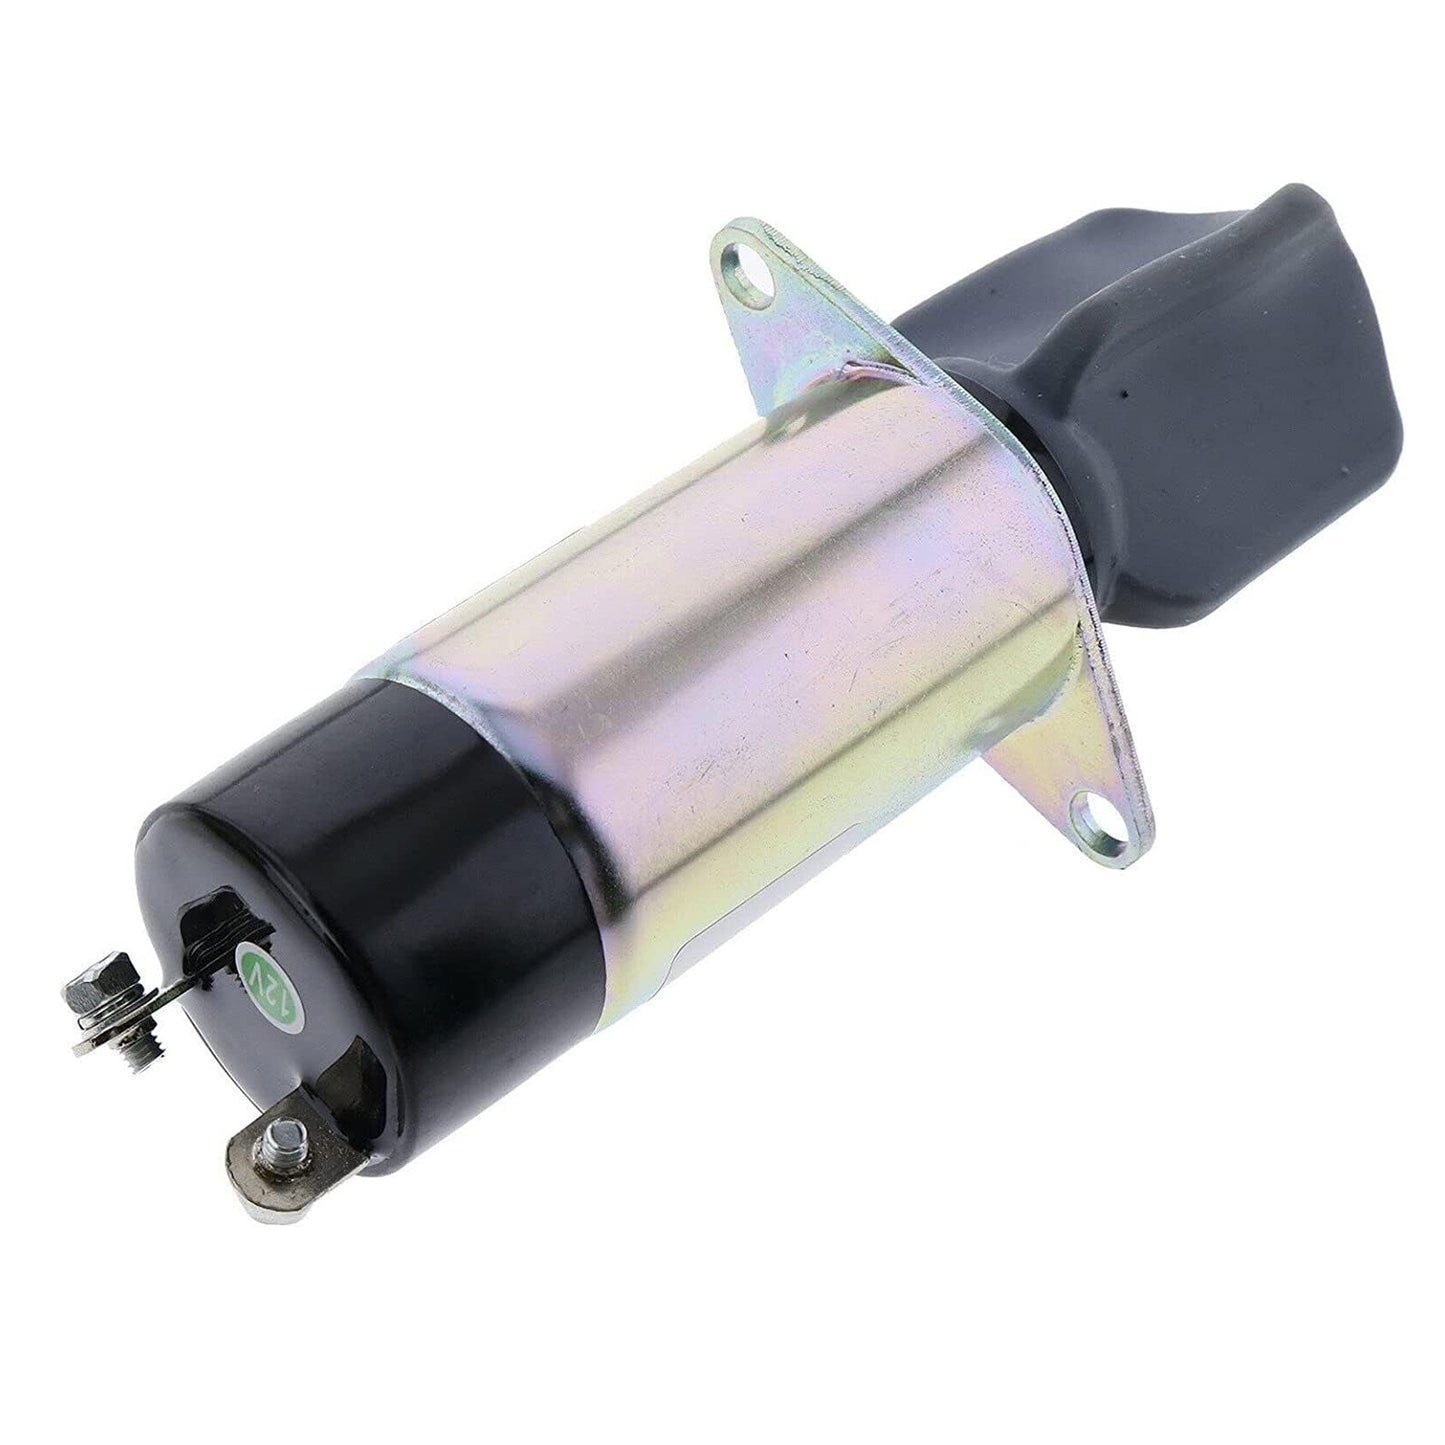 SA-3527-T 1504-12A7U1B1 Fuel Shutoff Stop Solenoid Valve Compatible With Woodward